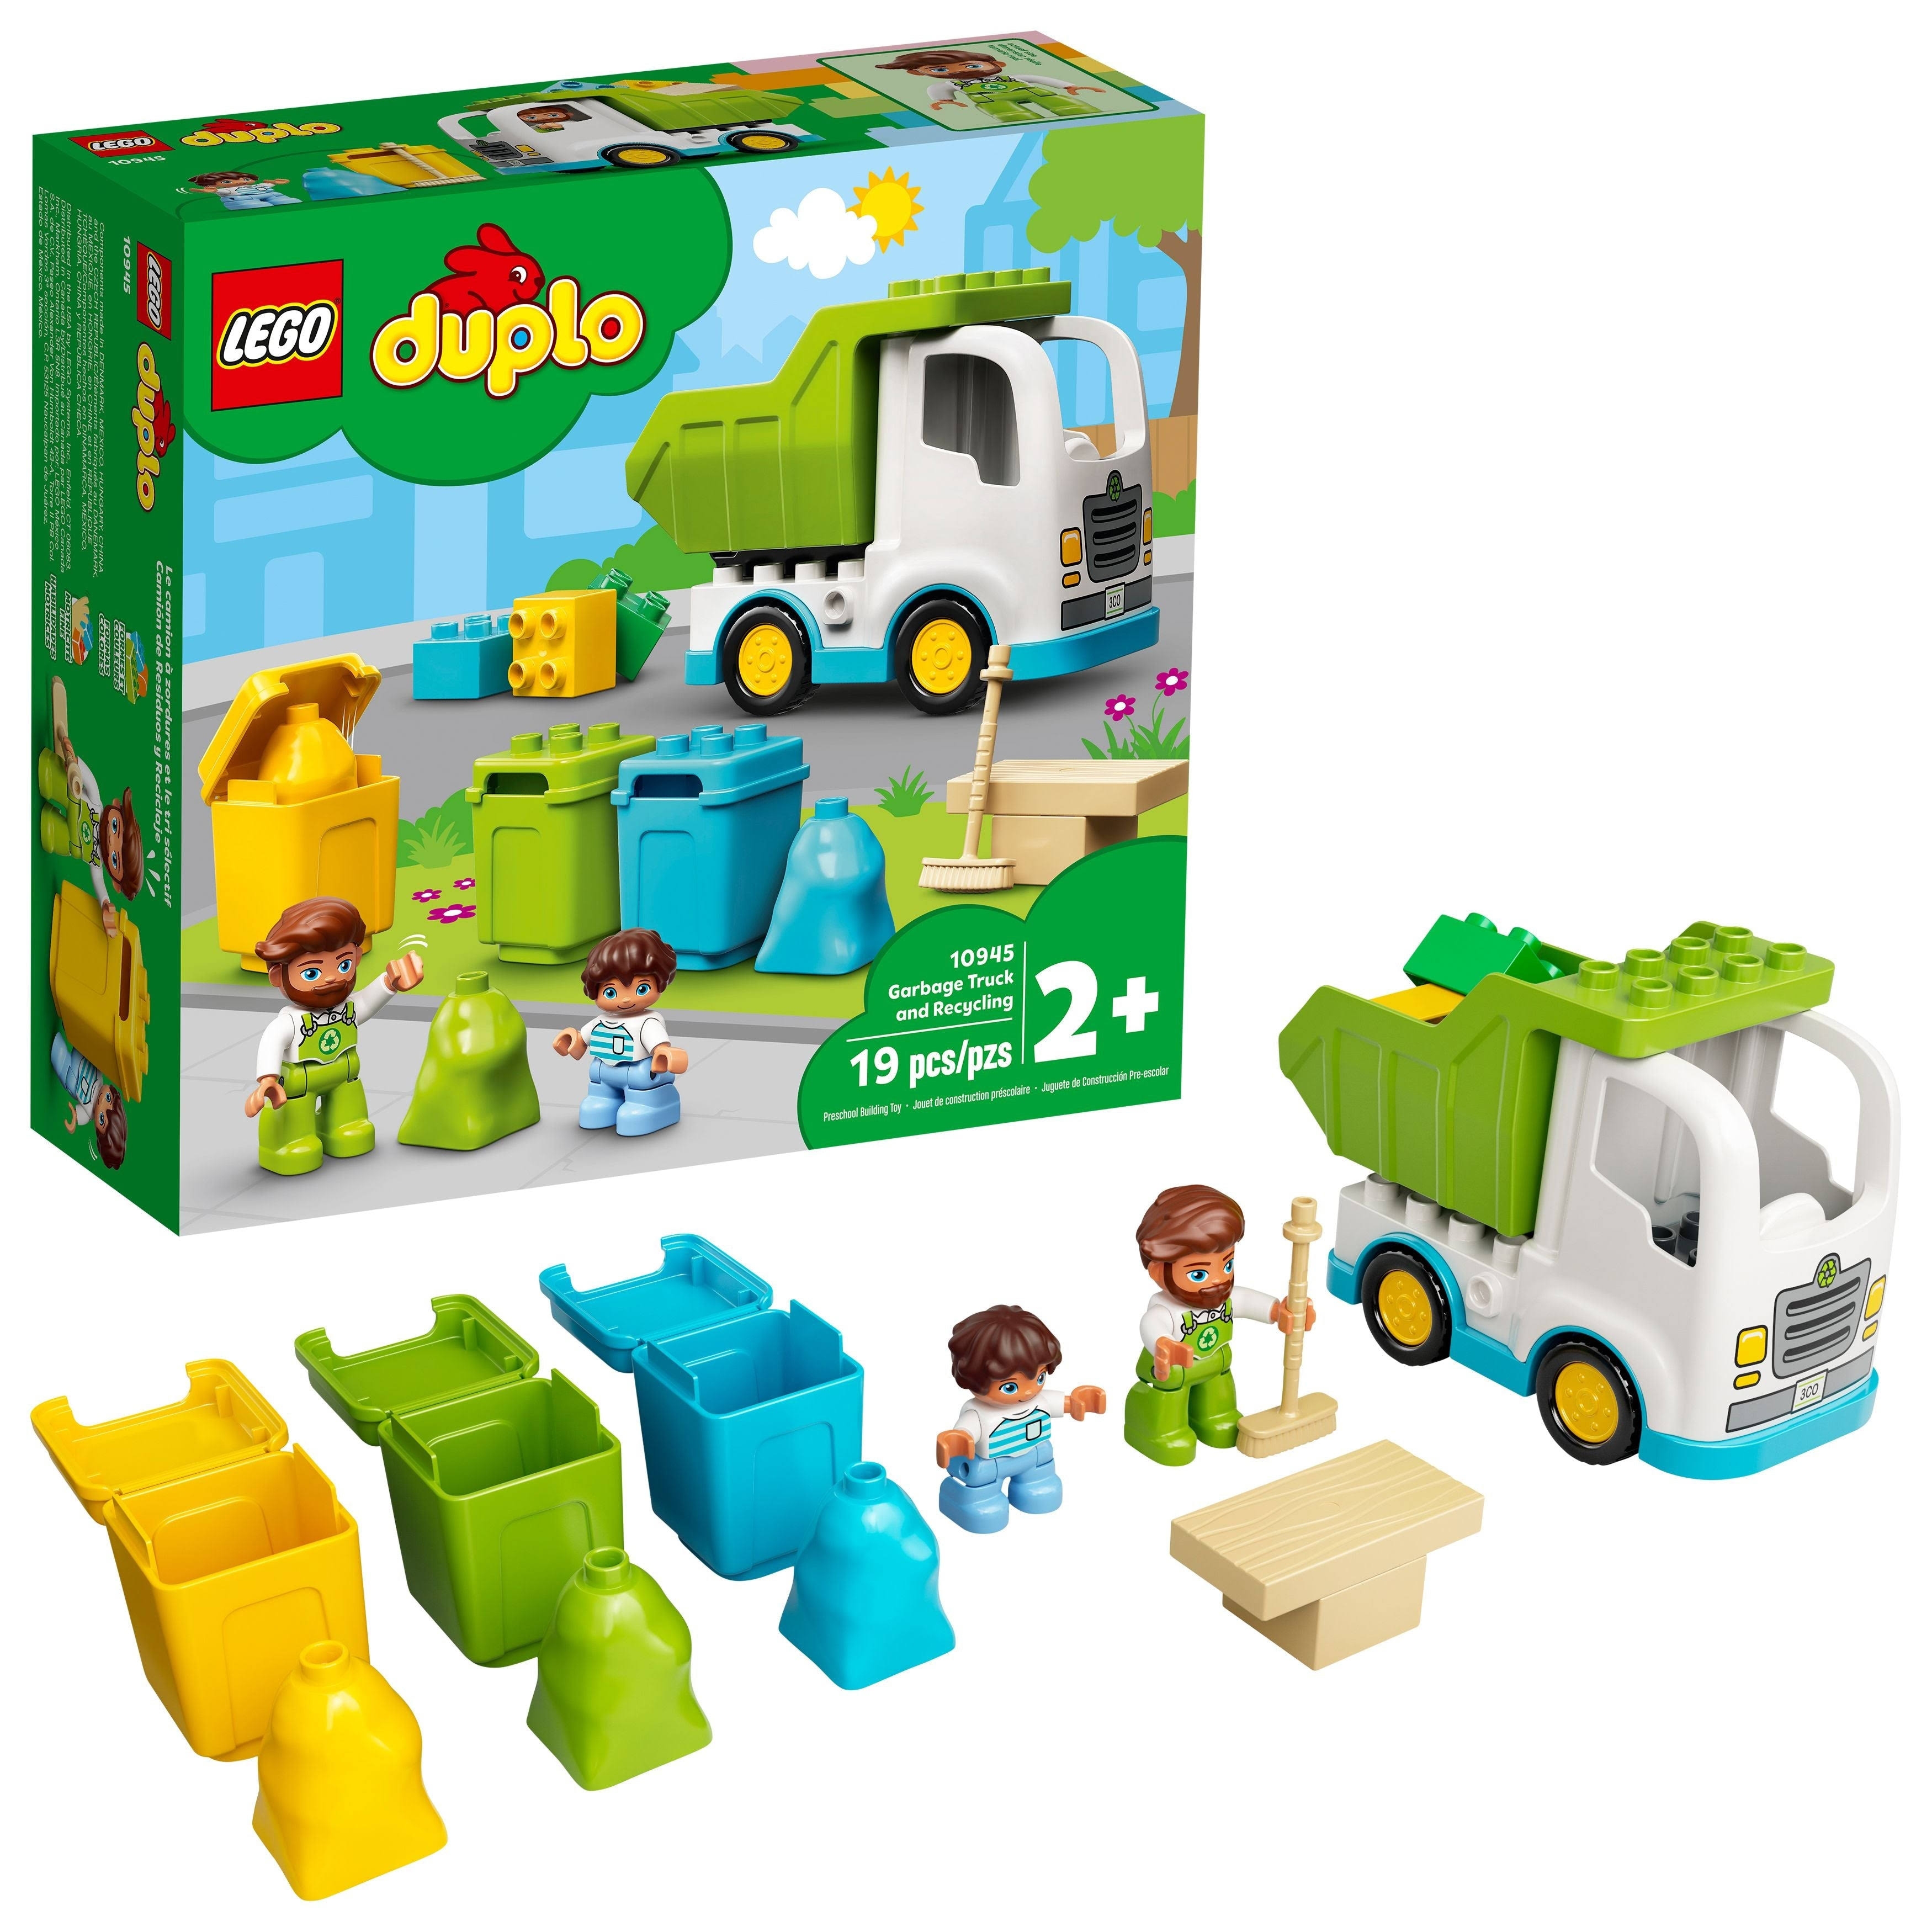 Lego - Duplo Town Garbage Truck and Recycling 10945